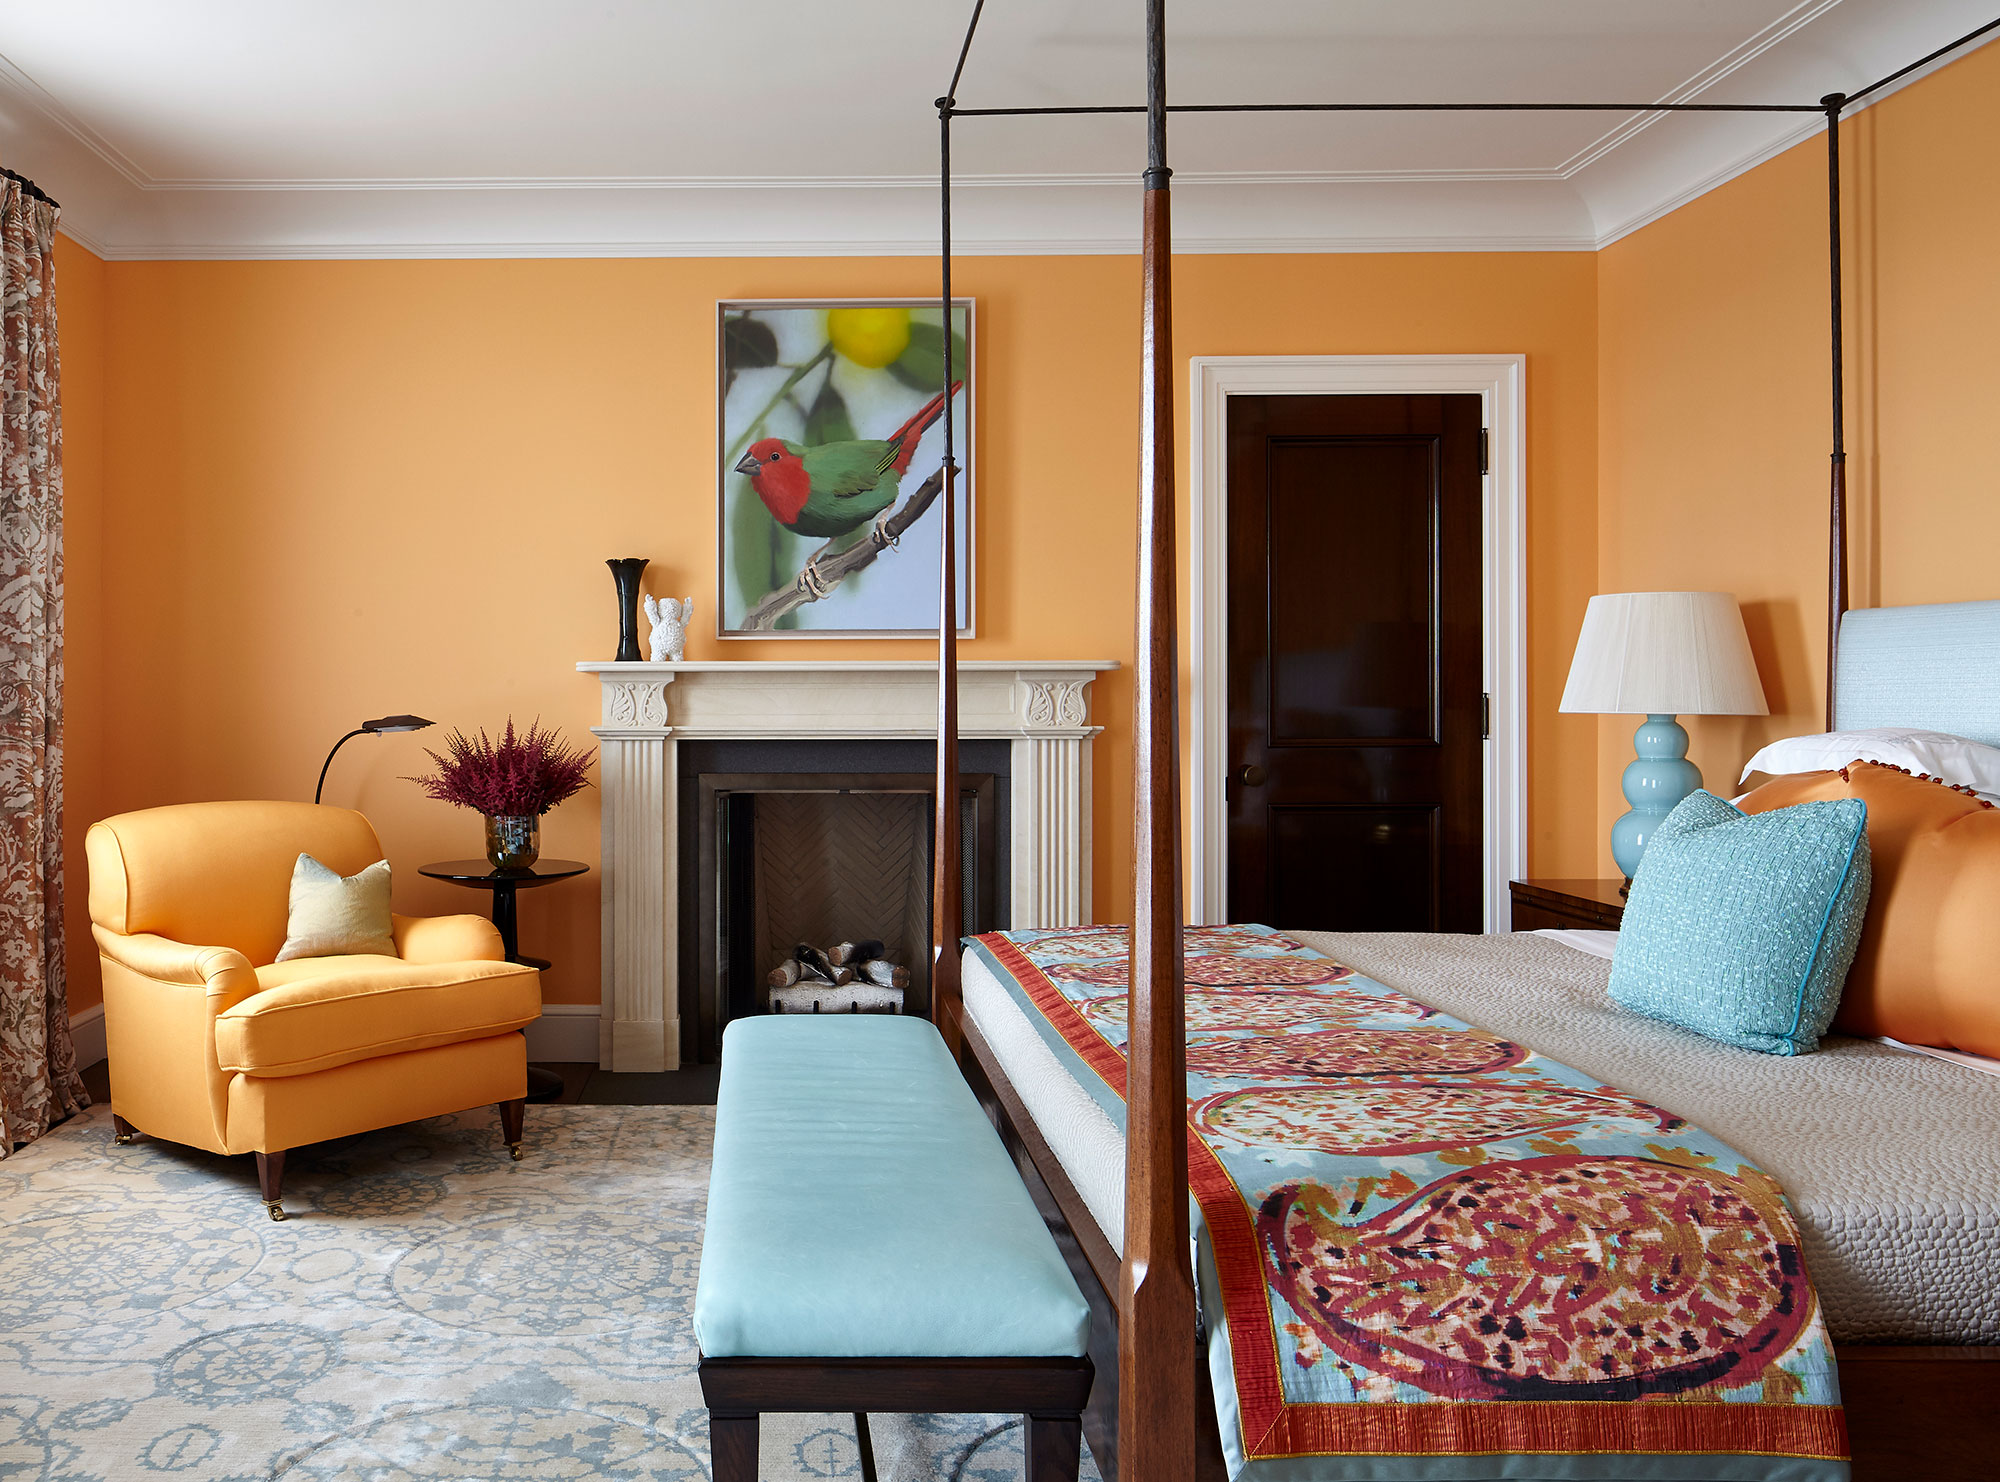 An orange bedroom with a fireplace and a four poster bed.